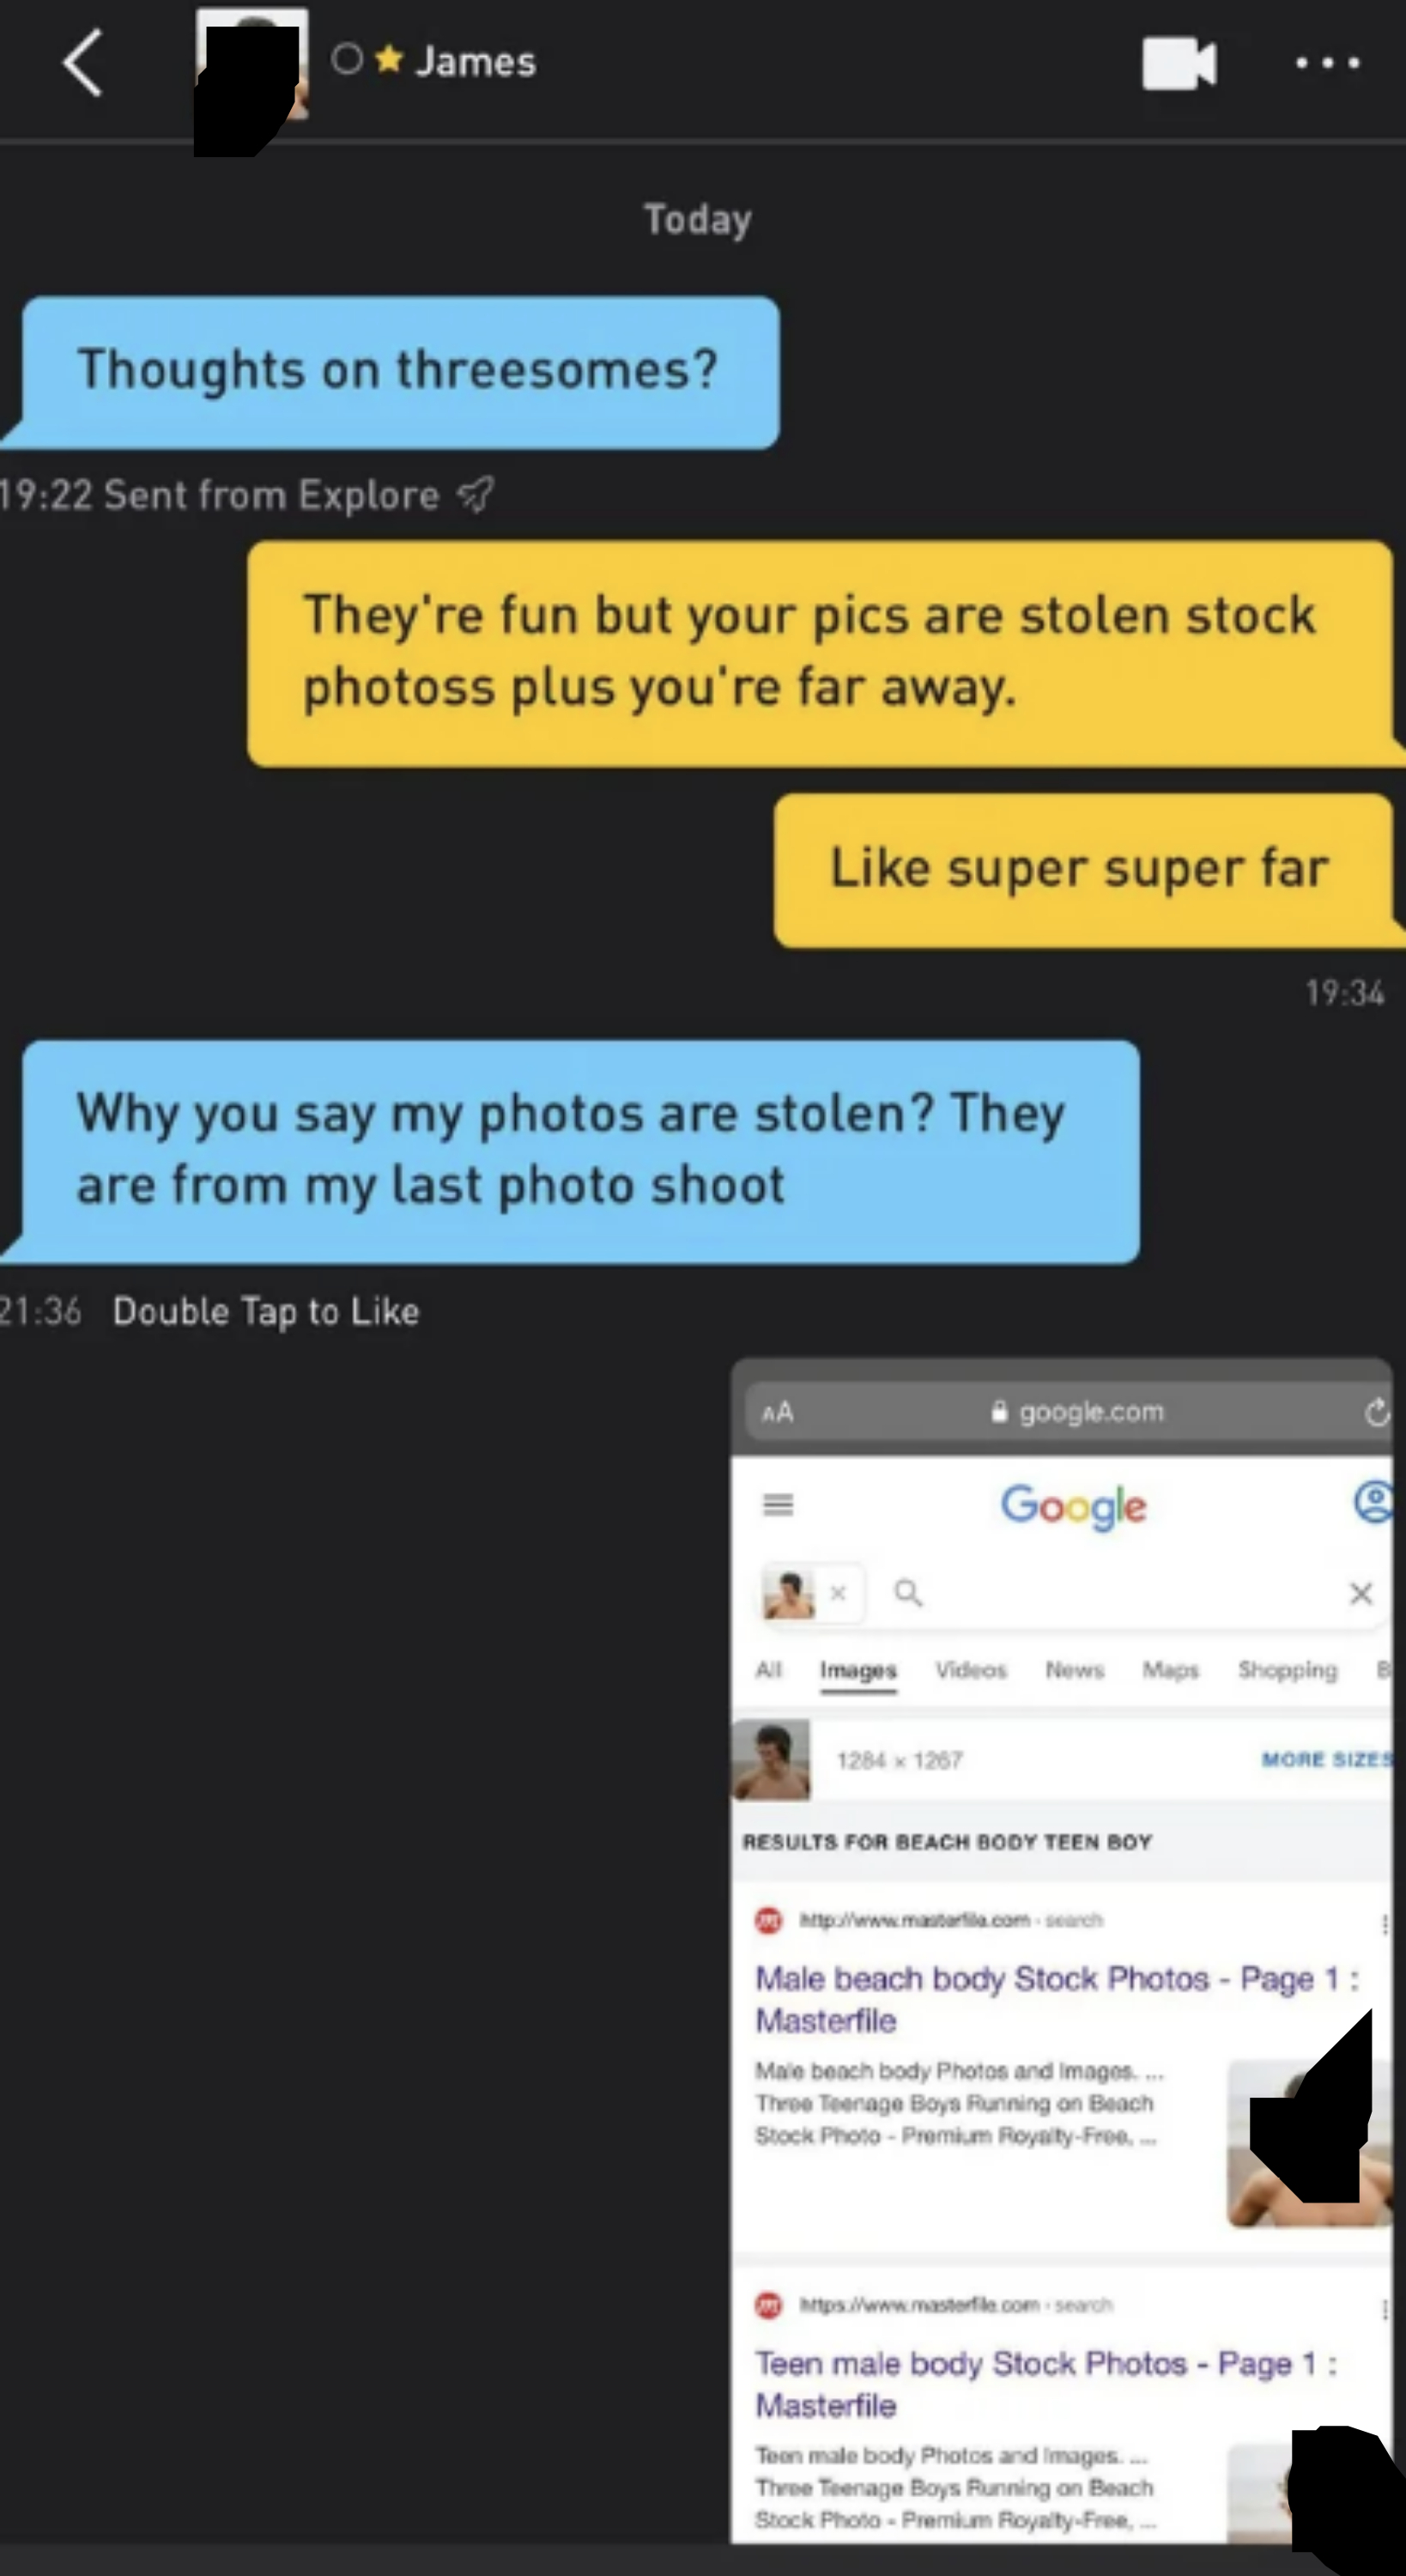 On a dating app, one person accuses the other of using stock photos, they ask why they would claim that, and then get a screenshot of their photos from a stock website